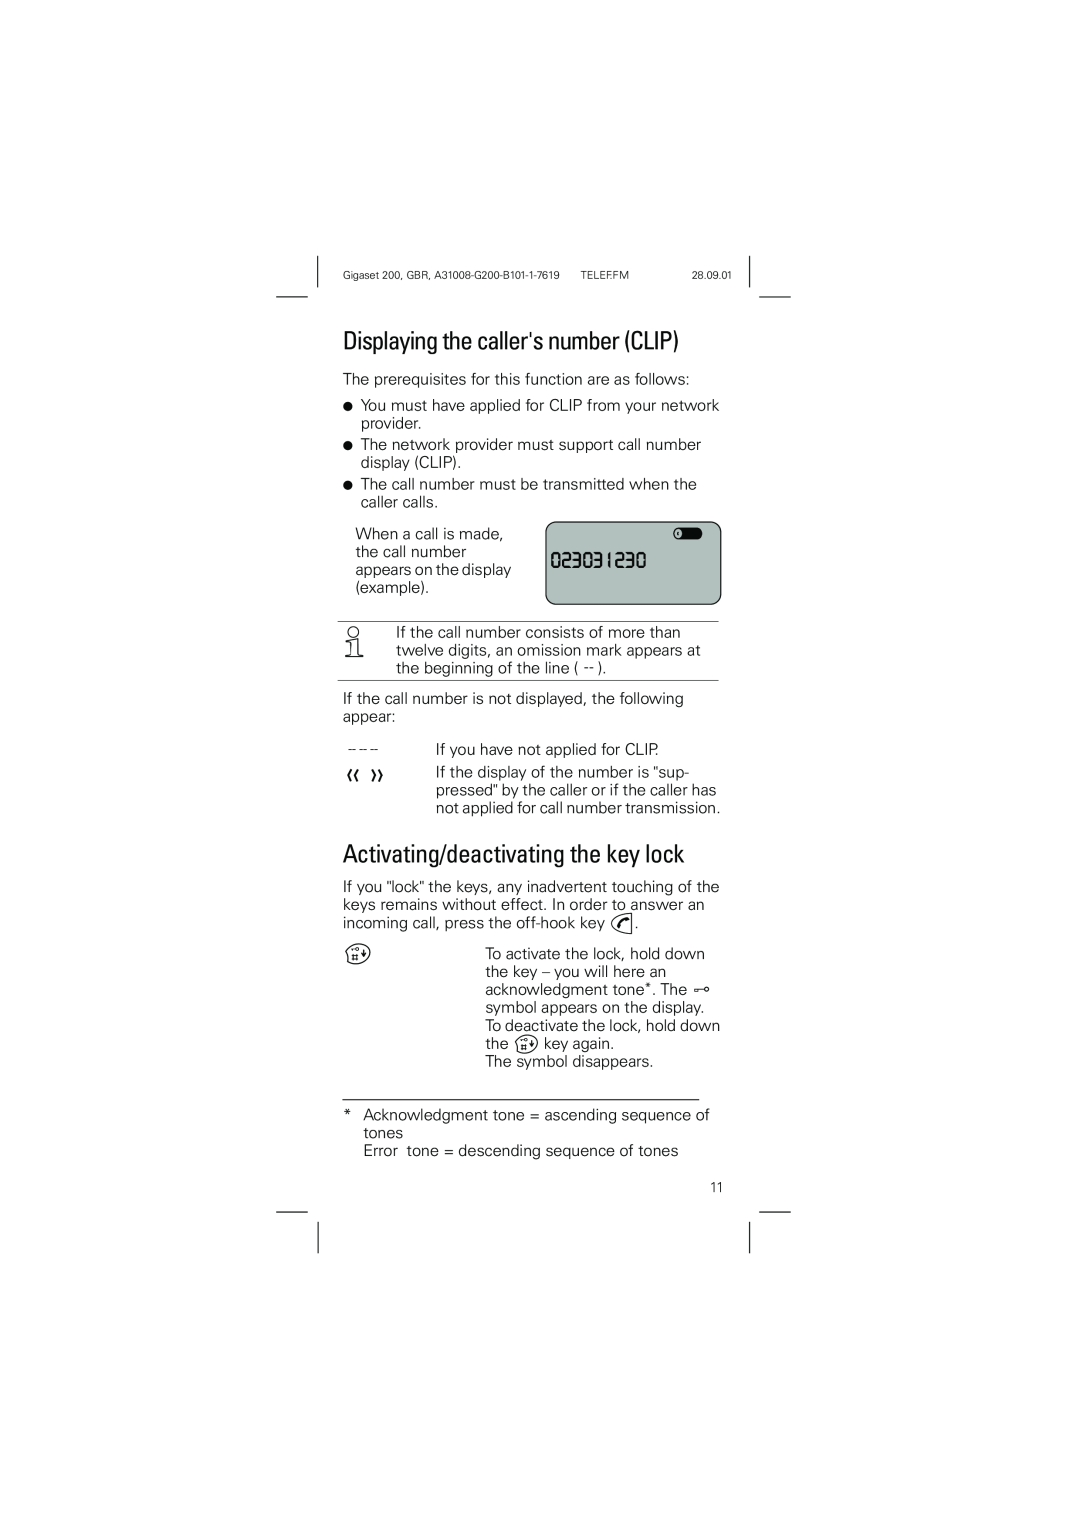 Siemens 200 manual Displaying the callers number CLIP, Activating/deactivating the key lock 